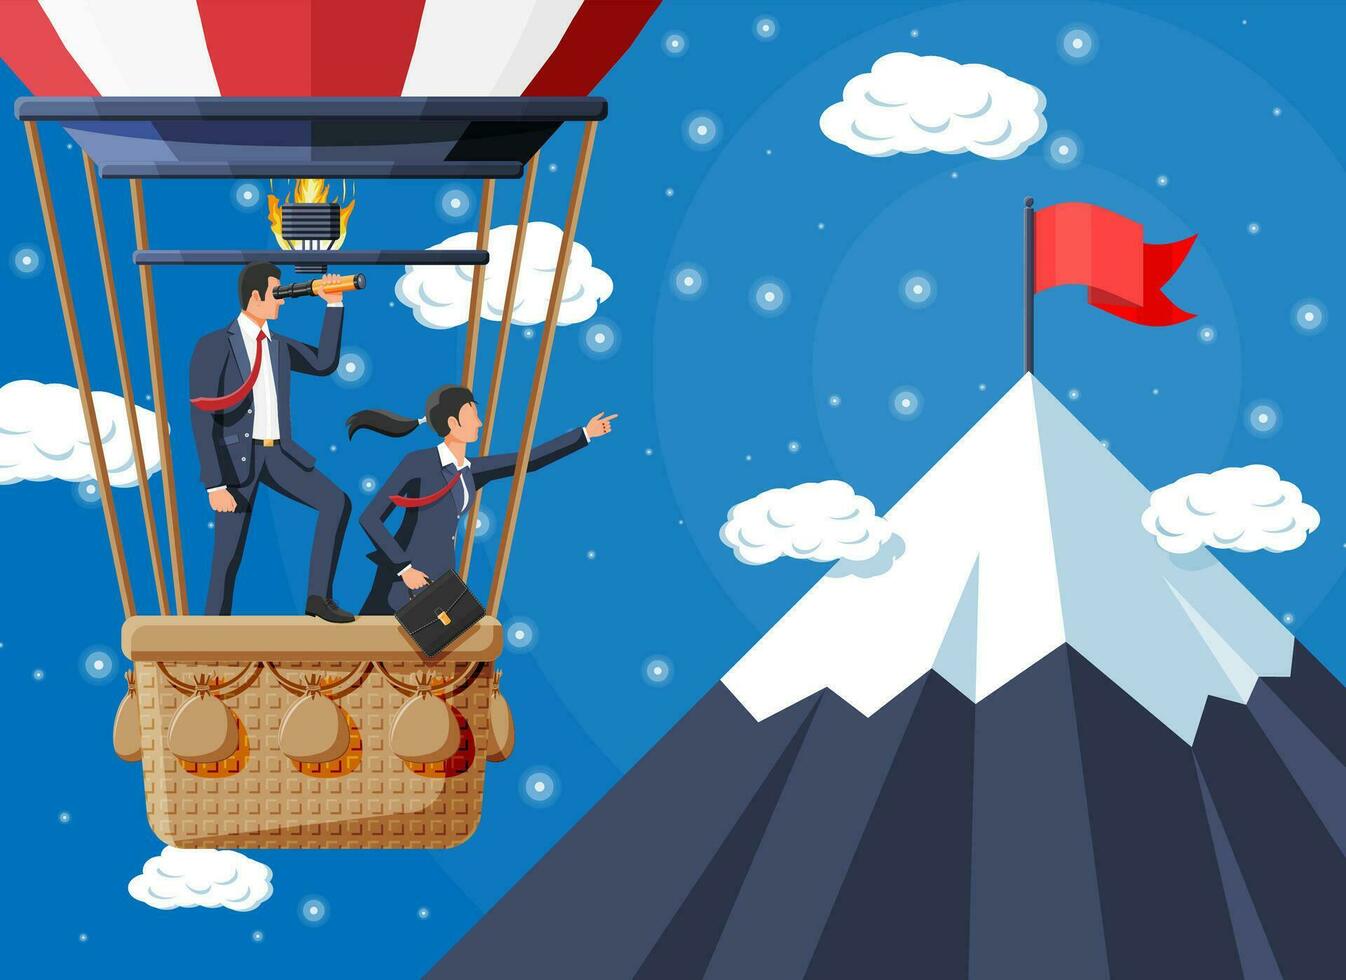 Business people on air balloon. Businessman with spyglass. Team work, collaboration. Searching business solution and strategy. Success achievement business vision career goal. Flat vector illustration